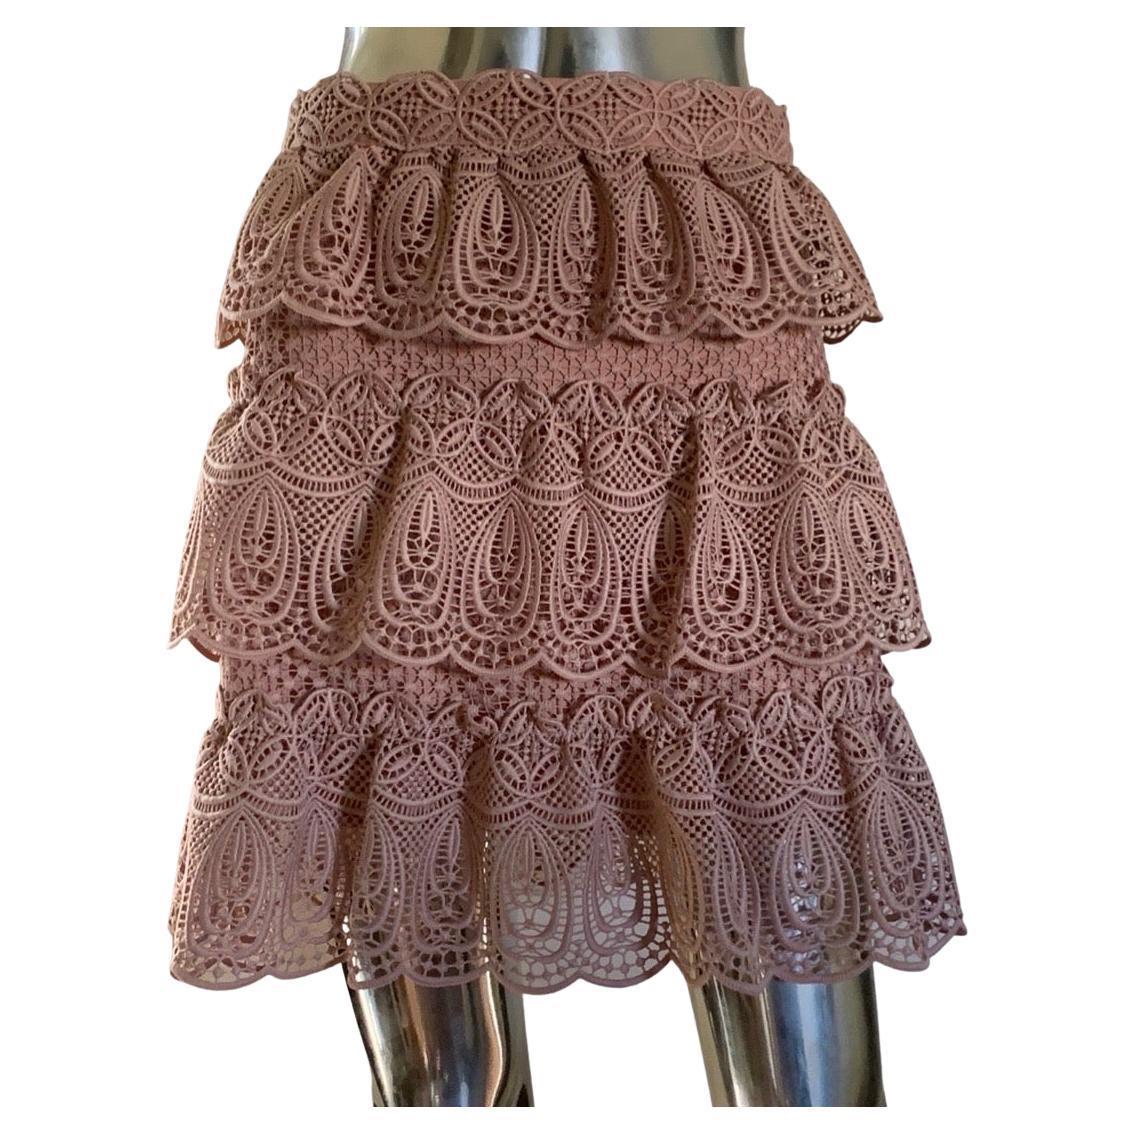 Self-Portrait Tiered Ruffle Blush Coral Guipure Lace Skirt Size 6